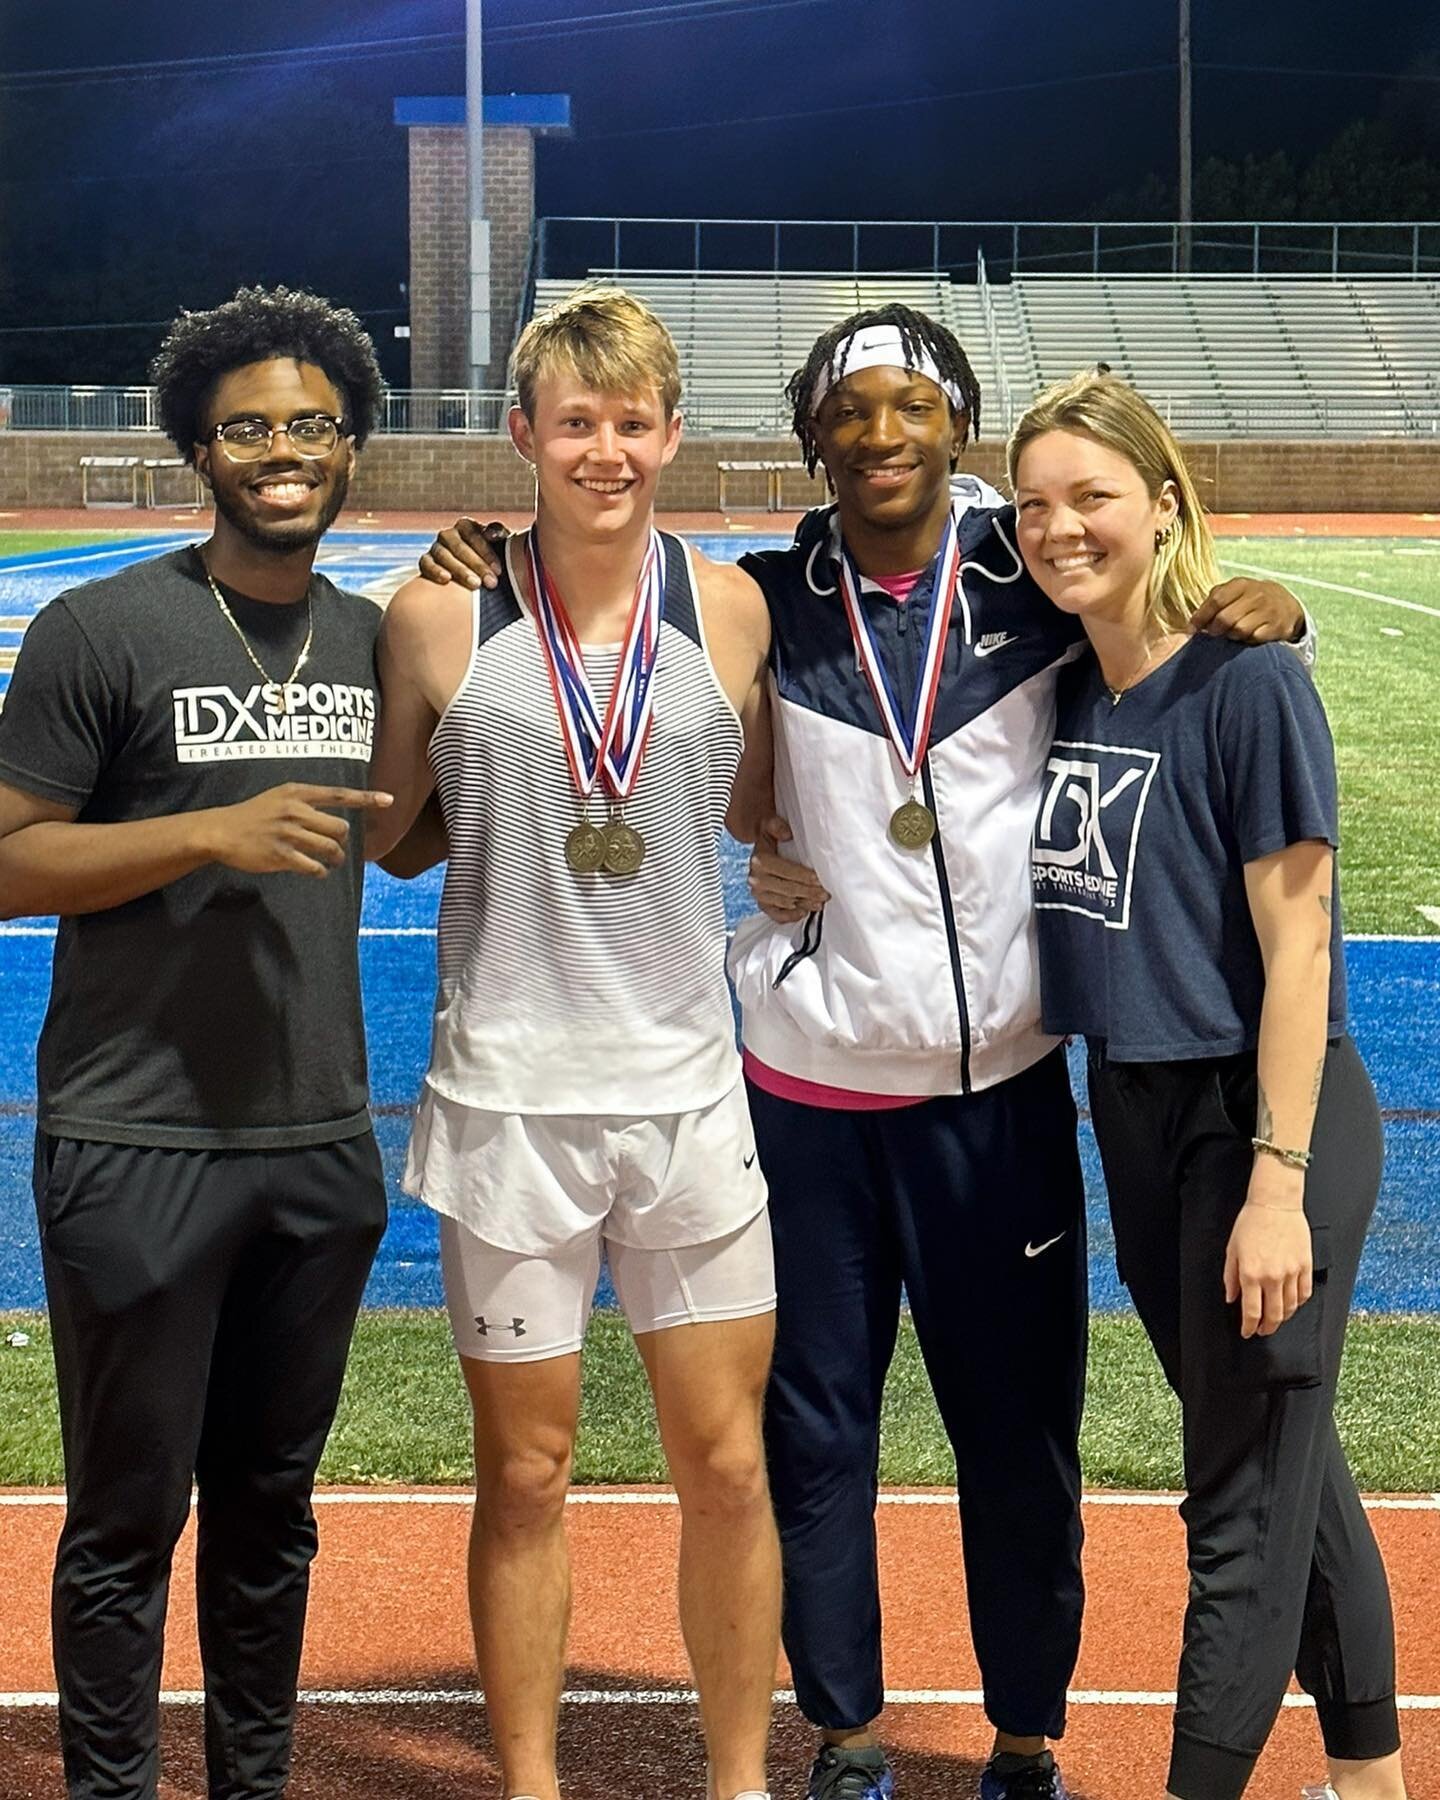 THESE ROCKSTAR PATIENTS TOOK HOME THE GOLD! 🥇

It's always an honor to prepare our track athletes for race day, but it's even more special when we get to see their talents in-person! 🏆👟 These guys are legends. 

🥇 4x400m - 1st Place 
Time: 3:23.8